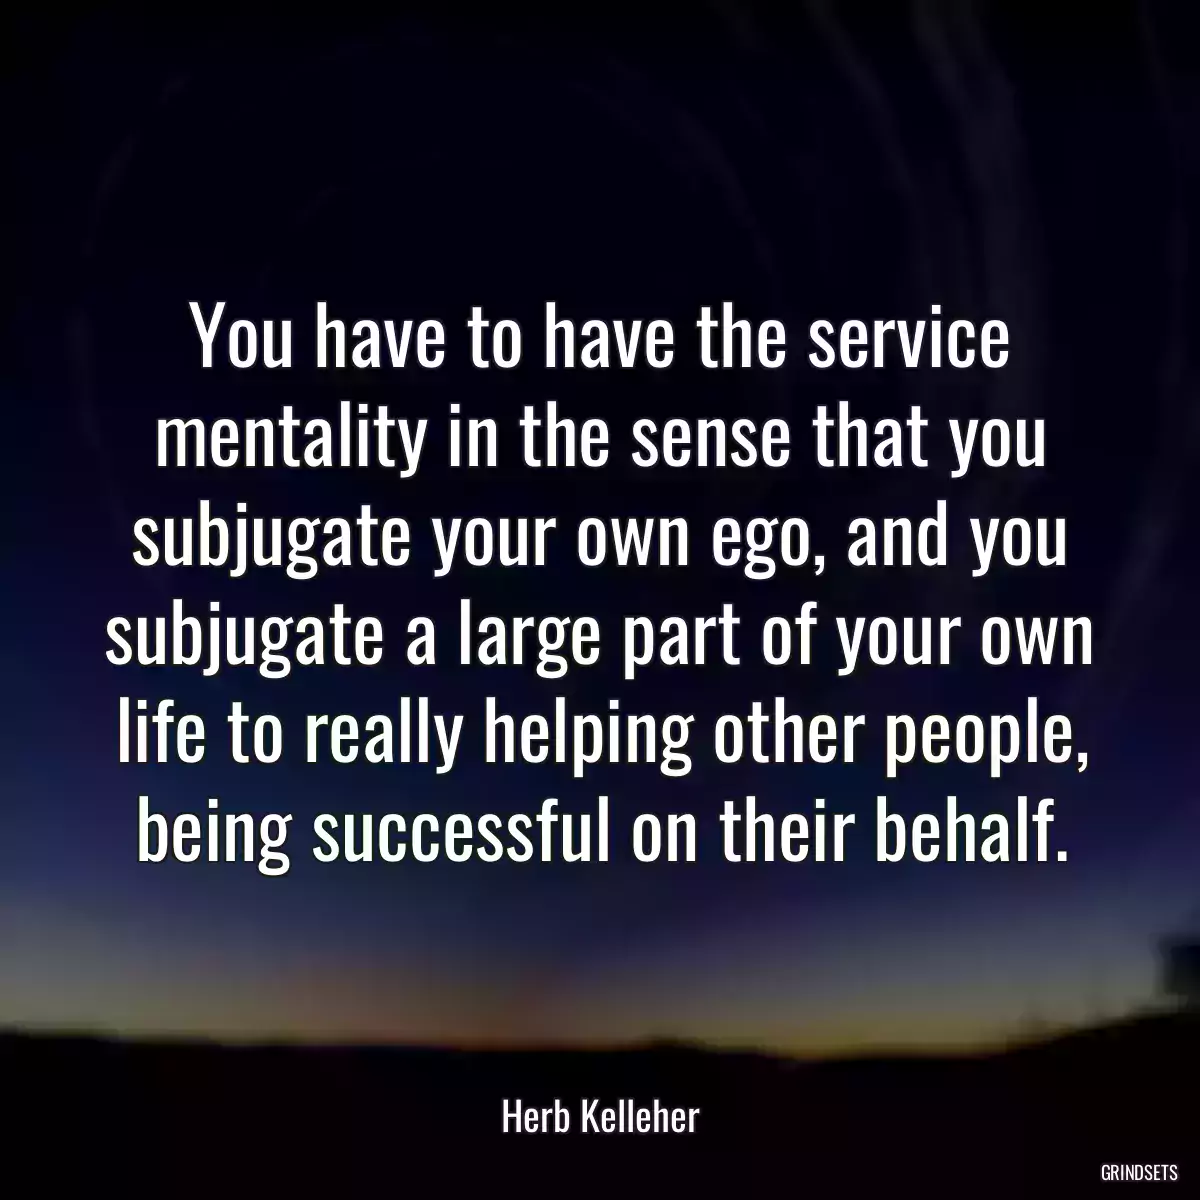 You have to have the service mentality in the sense that you subjugate your own ego, and you subjugate a large part of your own life to really helping other people, being successful on their behalf.